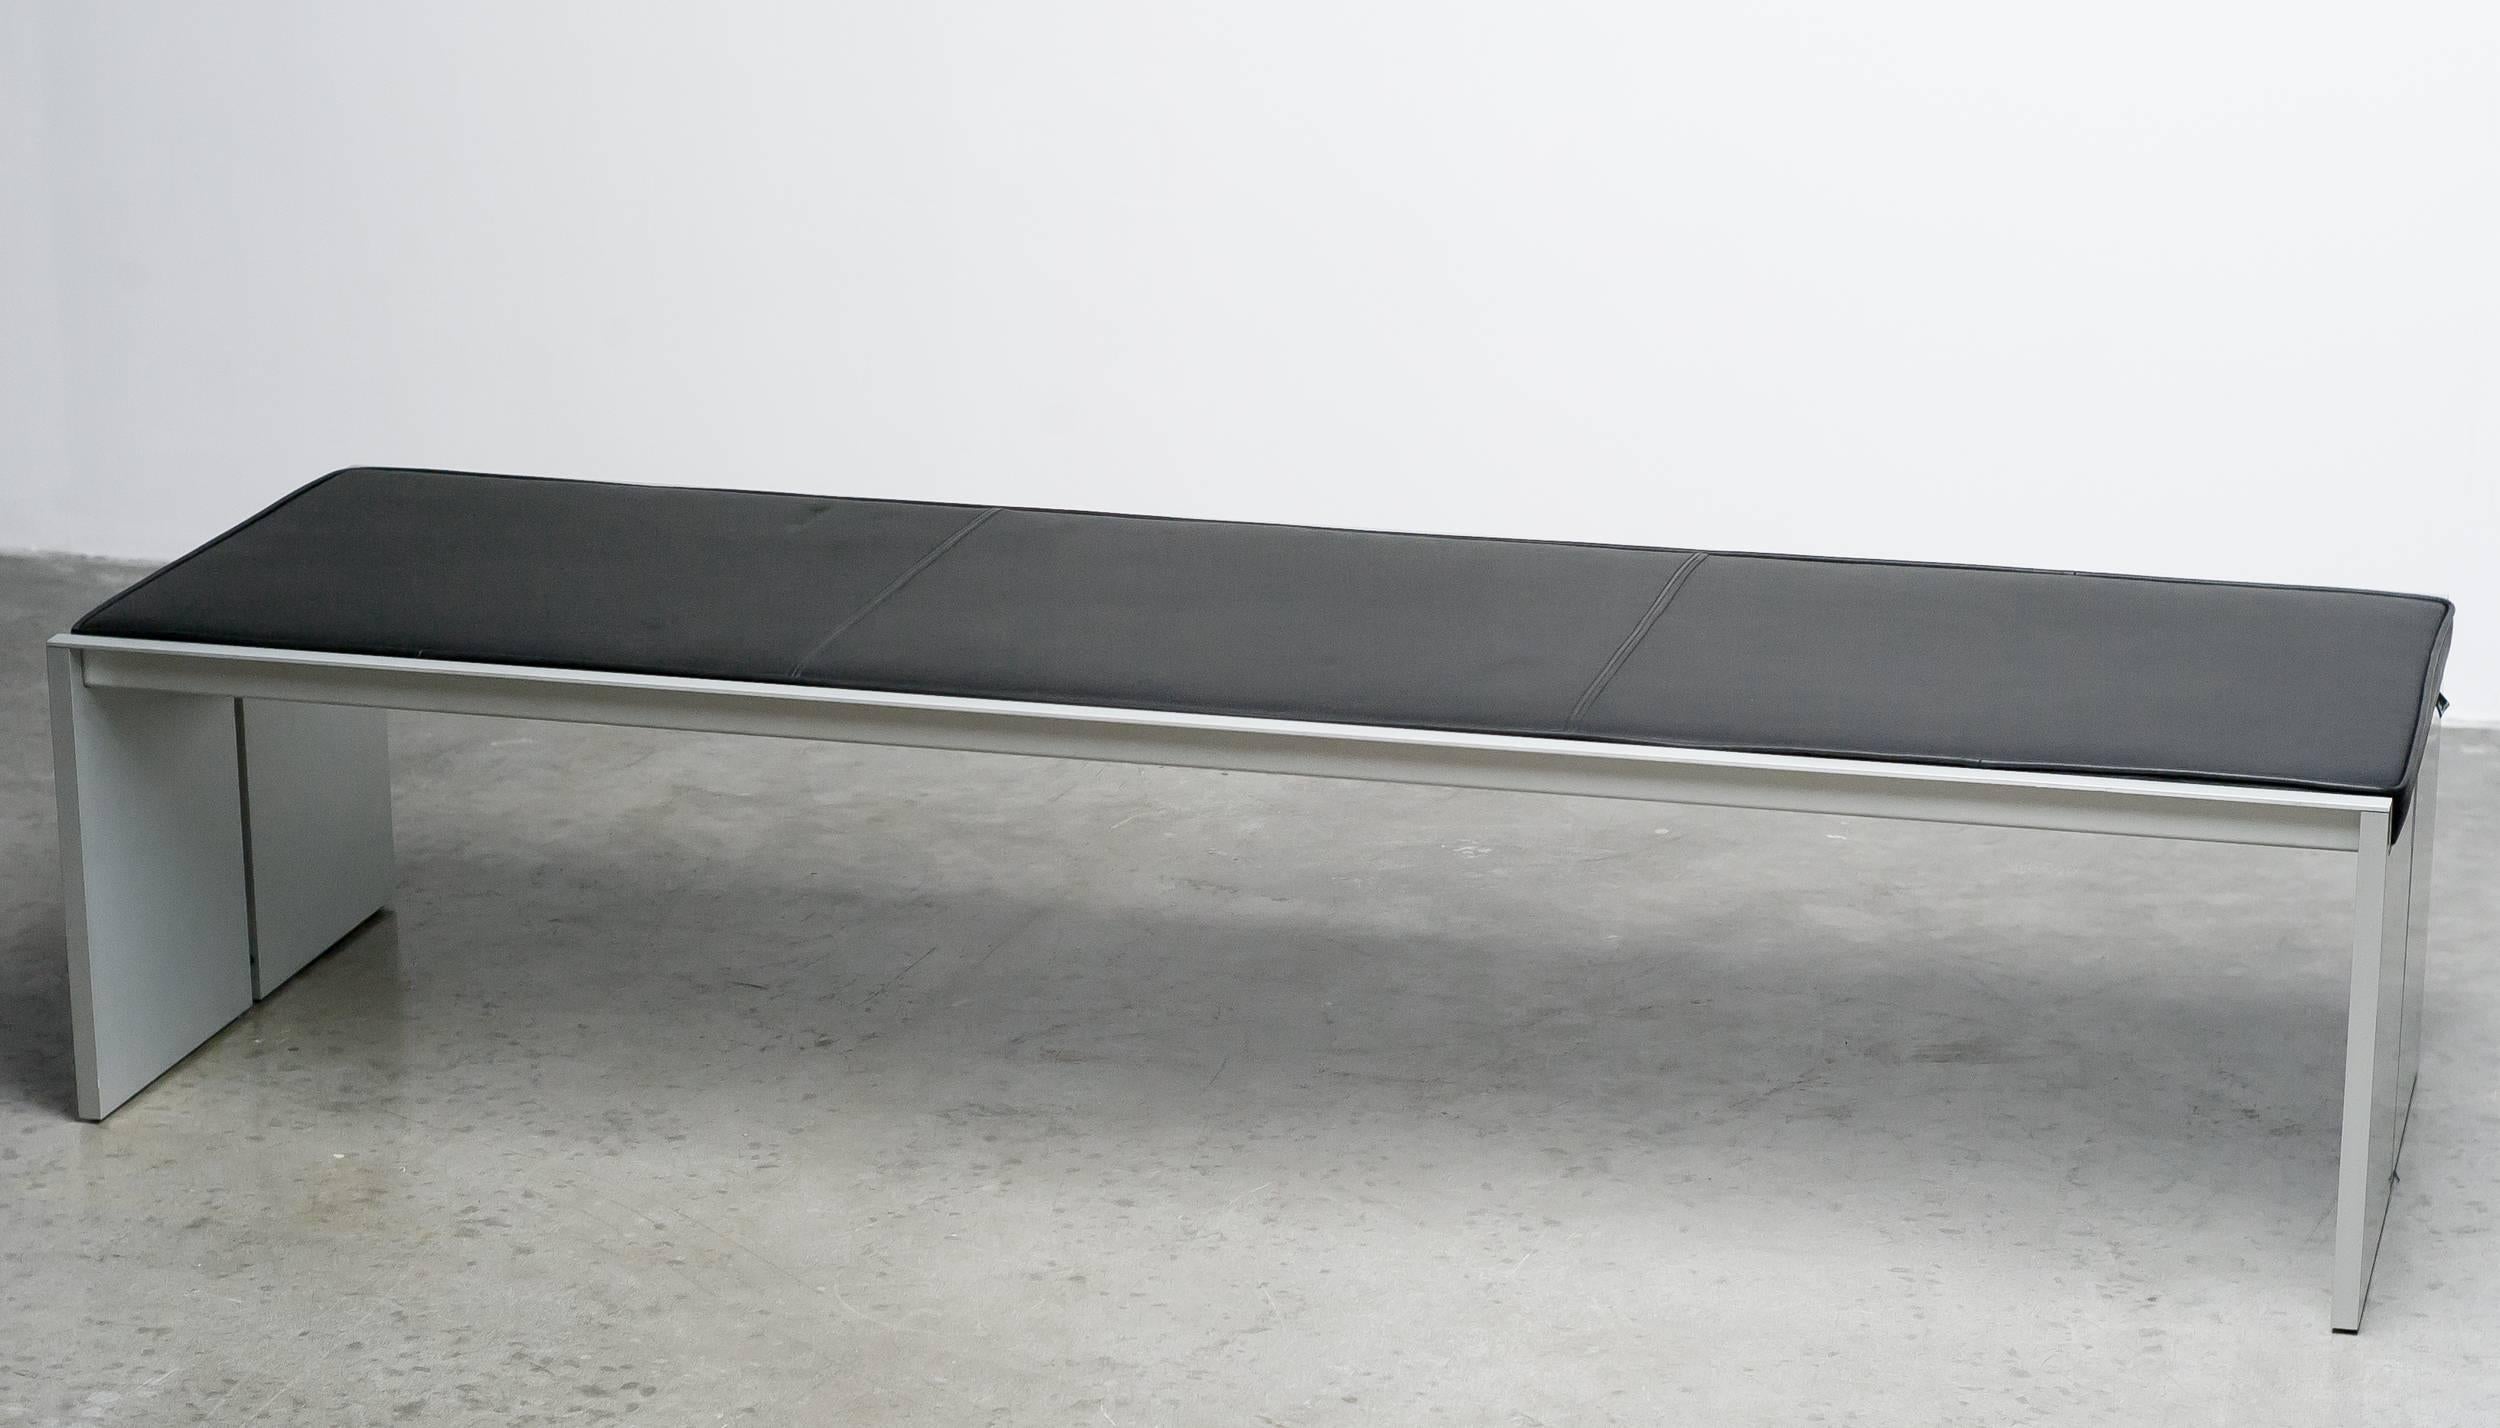 The BQ 01 bench was designed in the 1970s by the architect Wim Quist for the Kröller Müller museum in Otterloo, Netherlands and is produced since 1988 by Spectrum. This architectural bench is made of solid anodized aluminium with a seat pad in